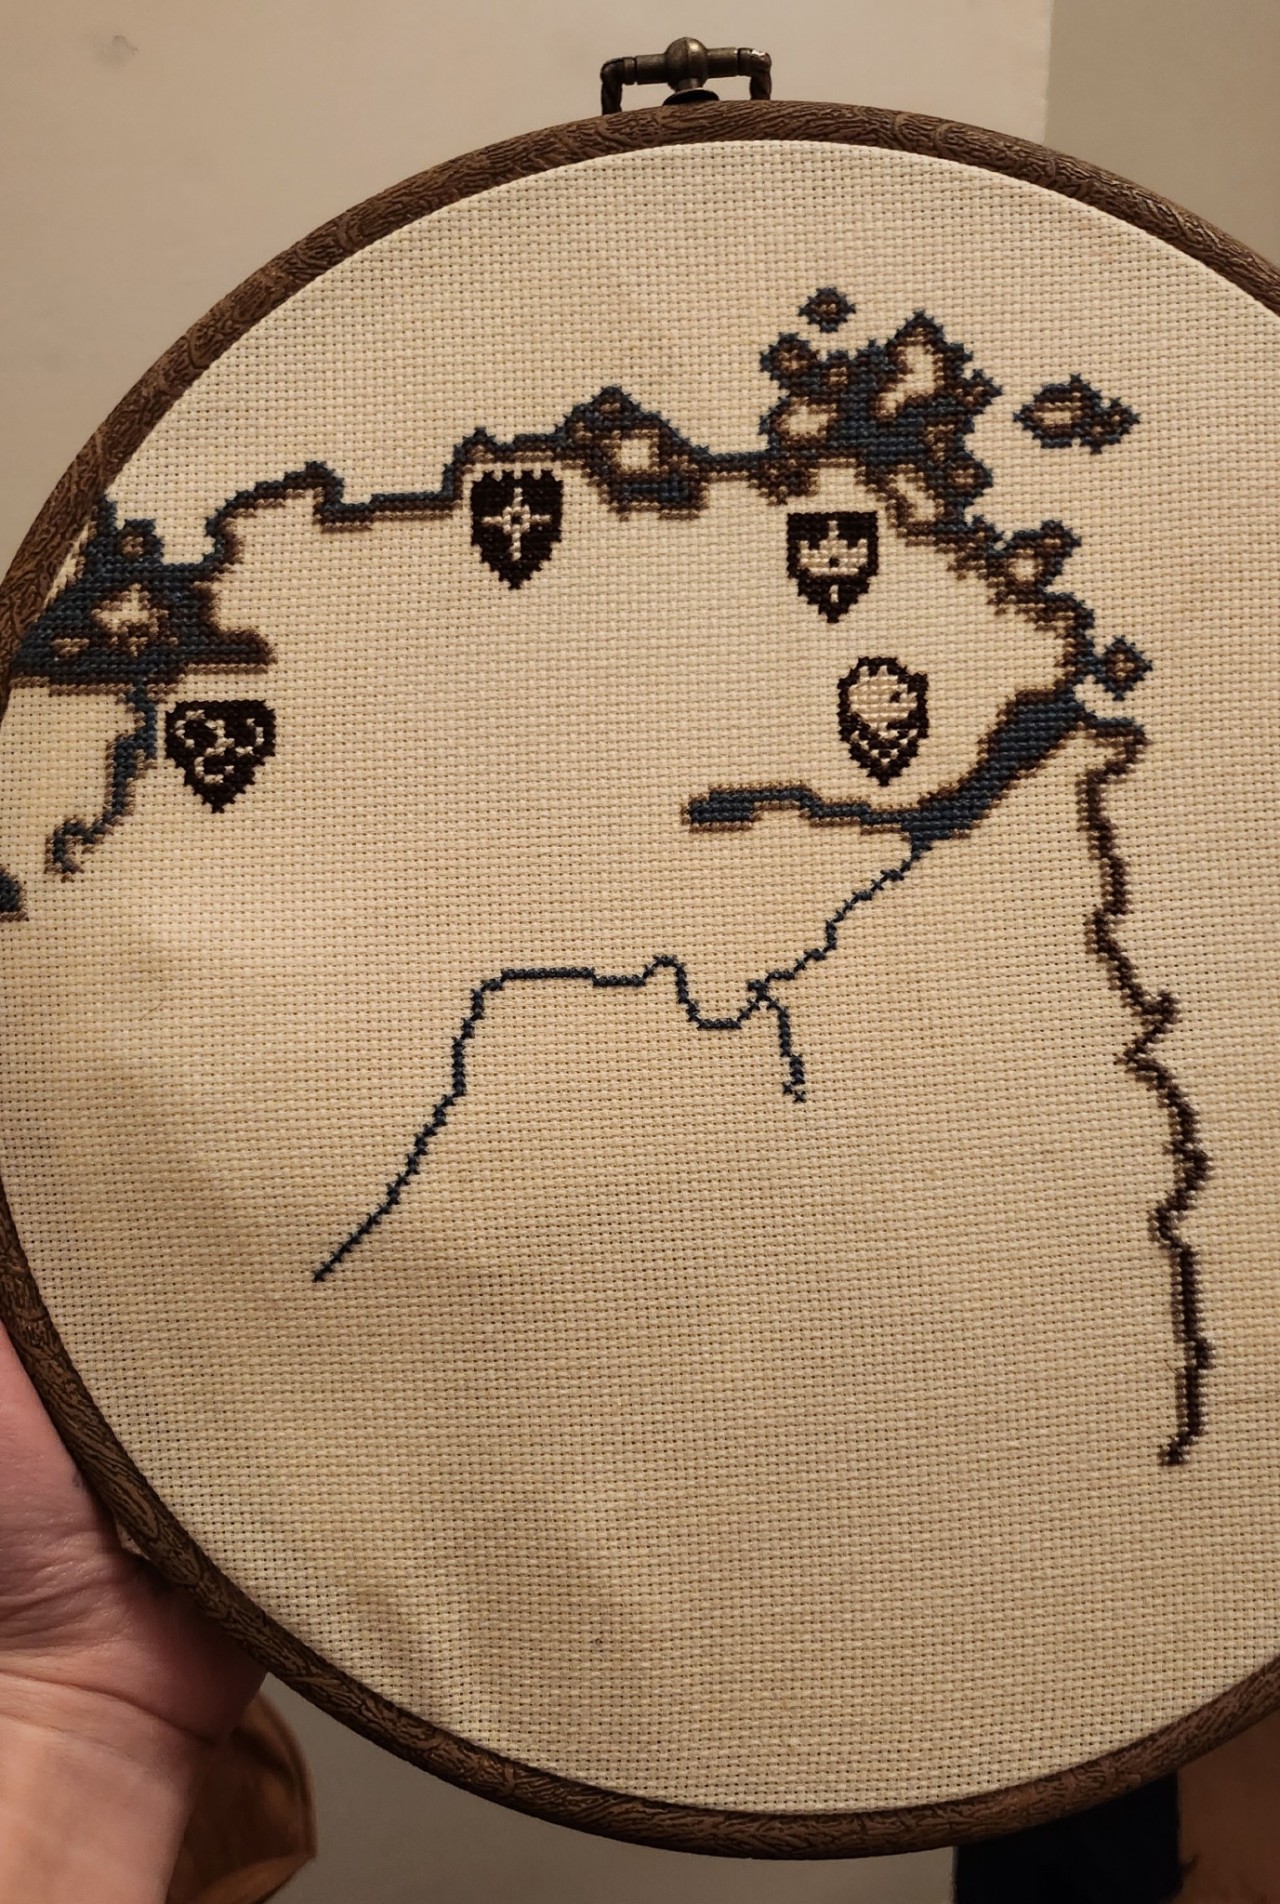 Tastes of Tamriel — Done with the base pattern! Just doing some gold